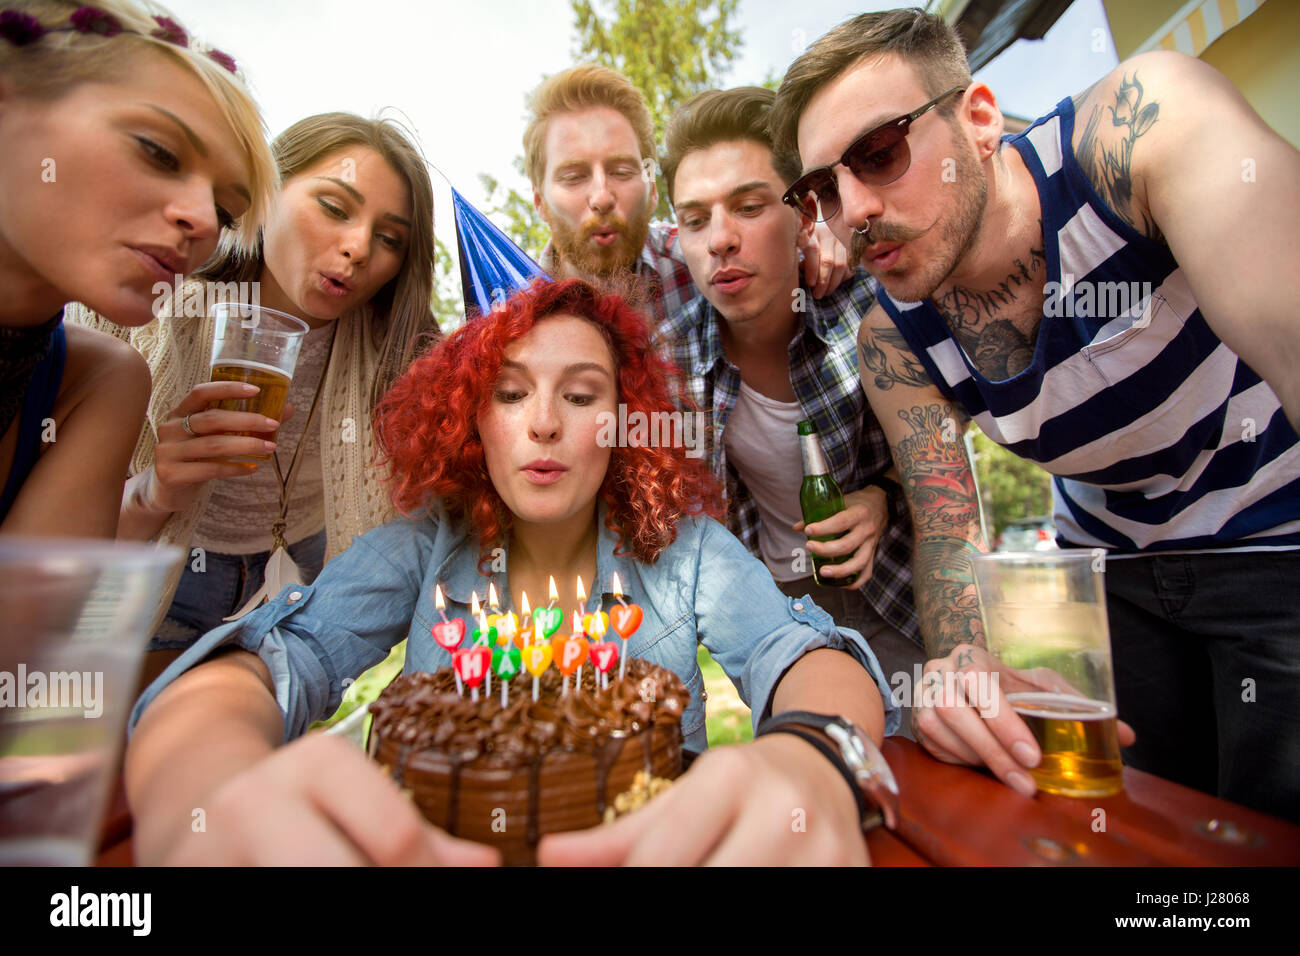 Birthday girl blows candles on chocolate birthday cake with friends Stock Photo